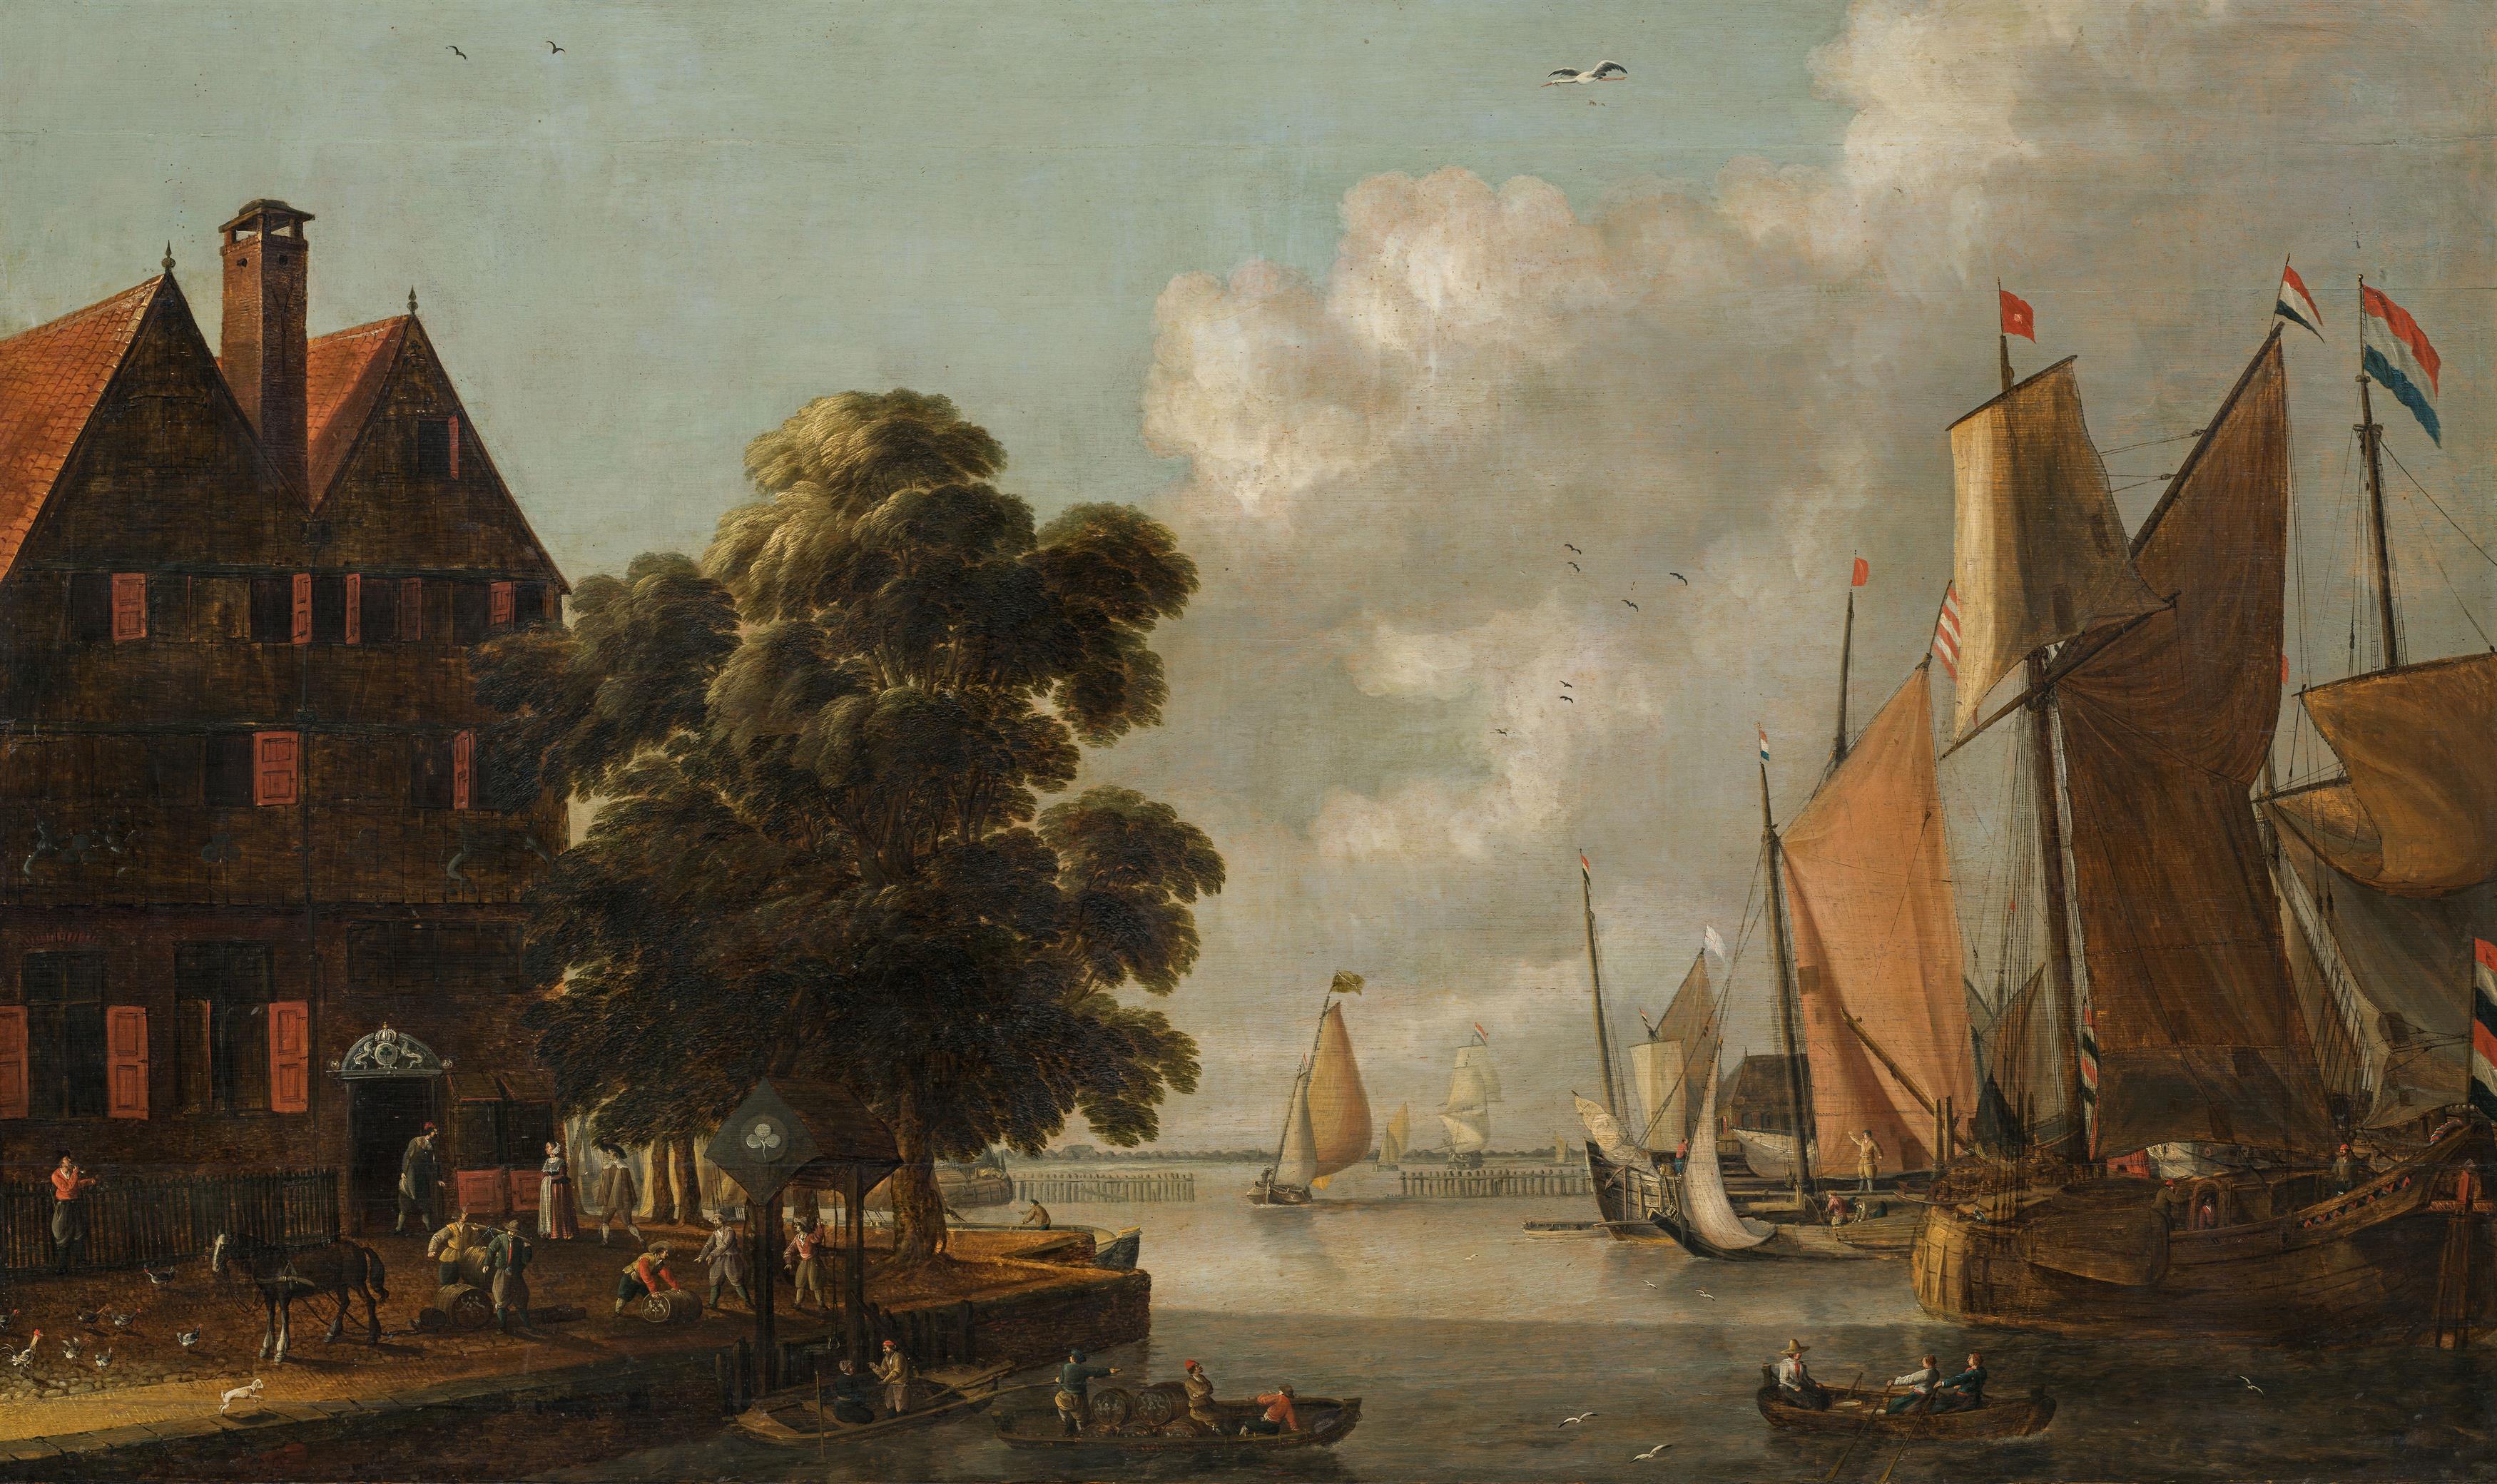 Gillis Peeters der Ältere: Harbour scene with brewery and sailing boats